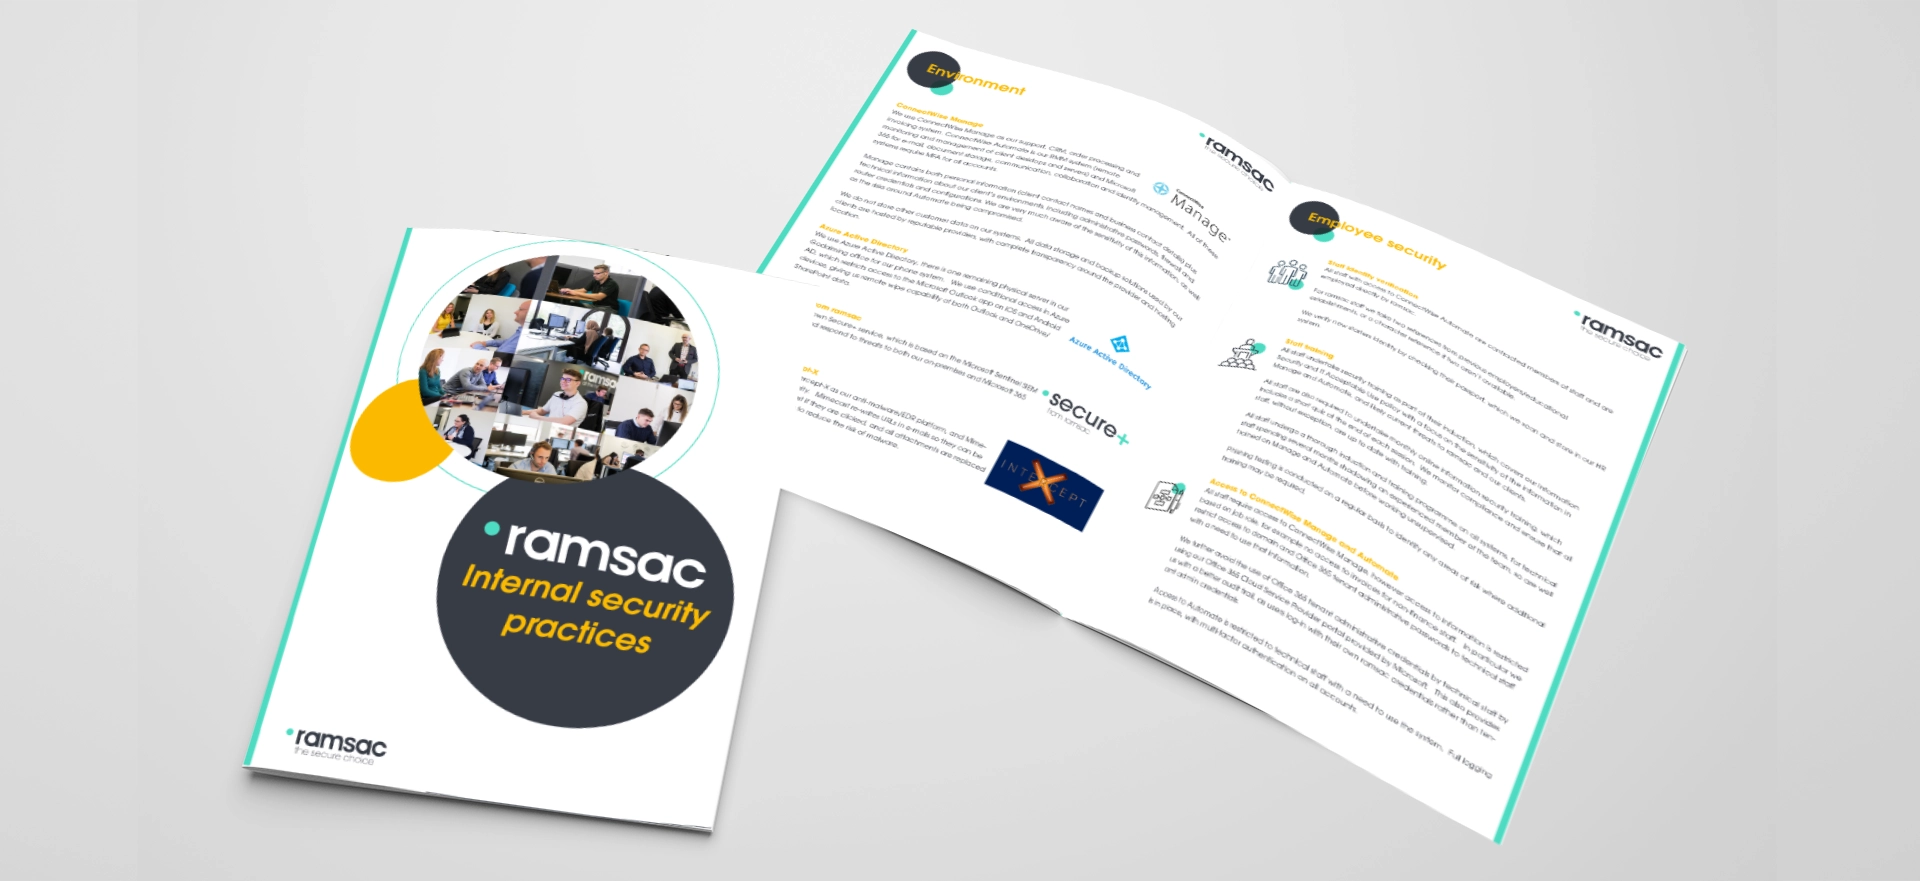 ramsac’s internal security practices – supply chain security        